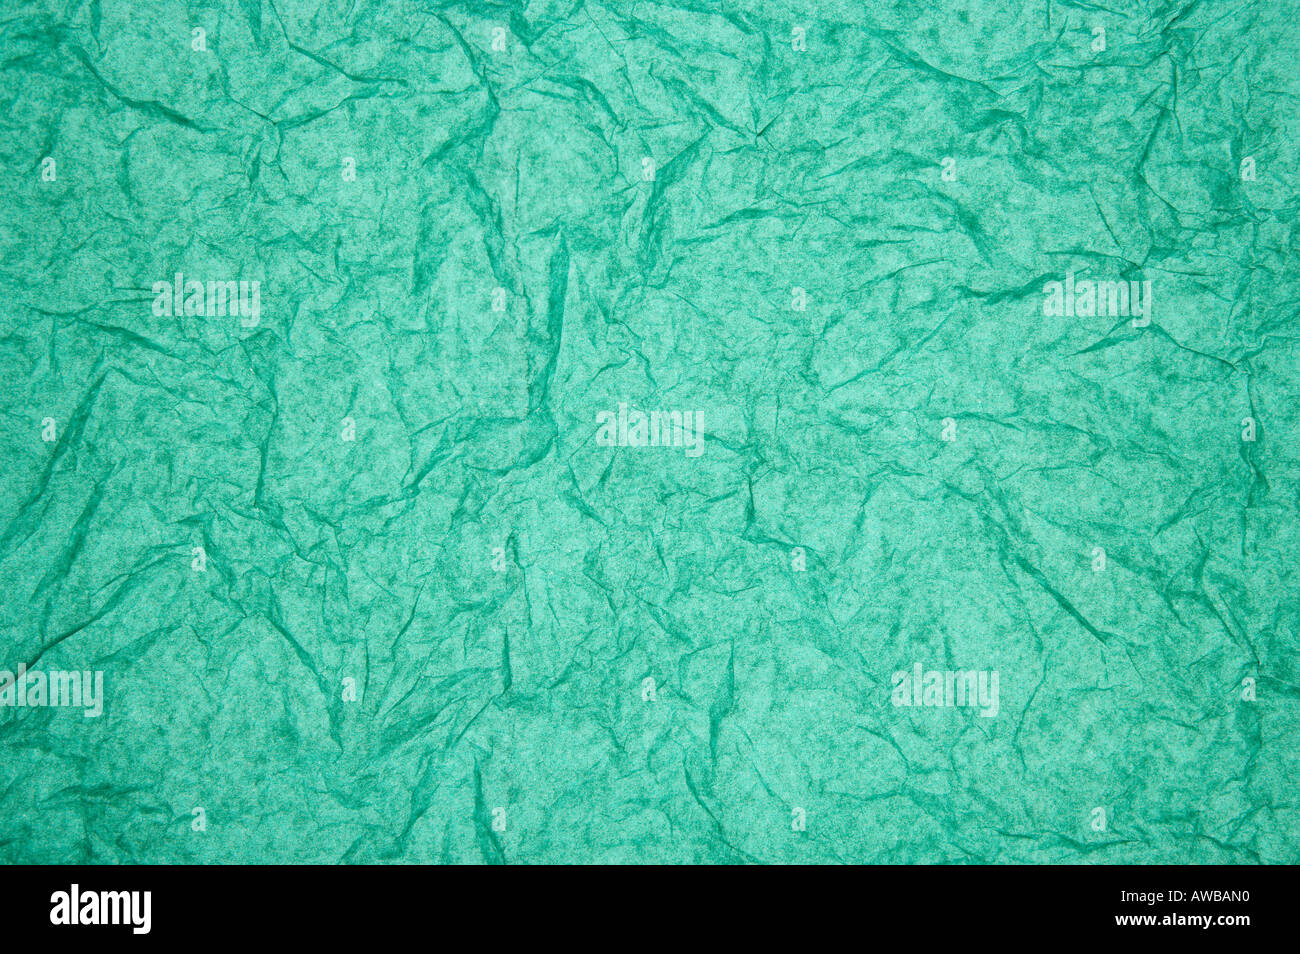 ABSTRACT RANDOM BACKGROUND OF CREASED CRUMPLED PALE GREEN TISSUE PAPER Stock Photo